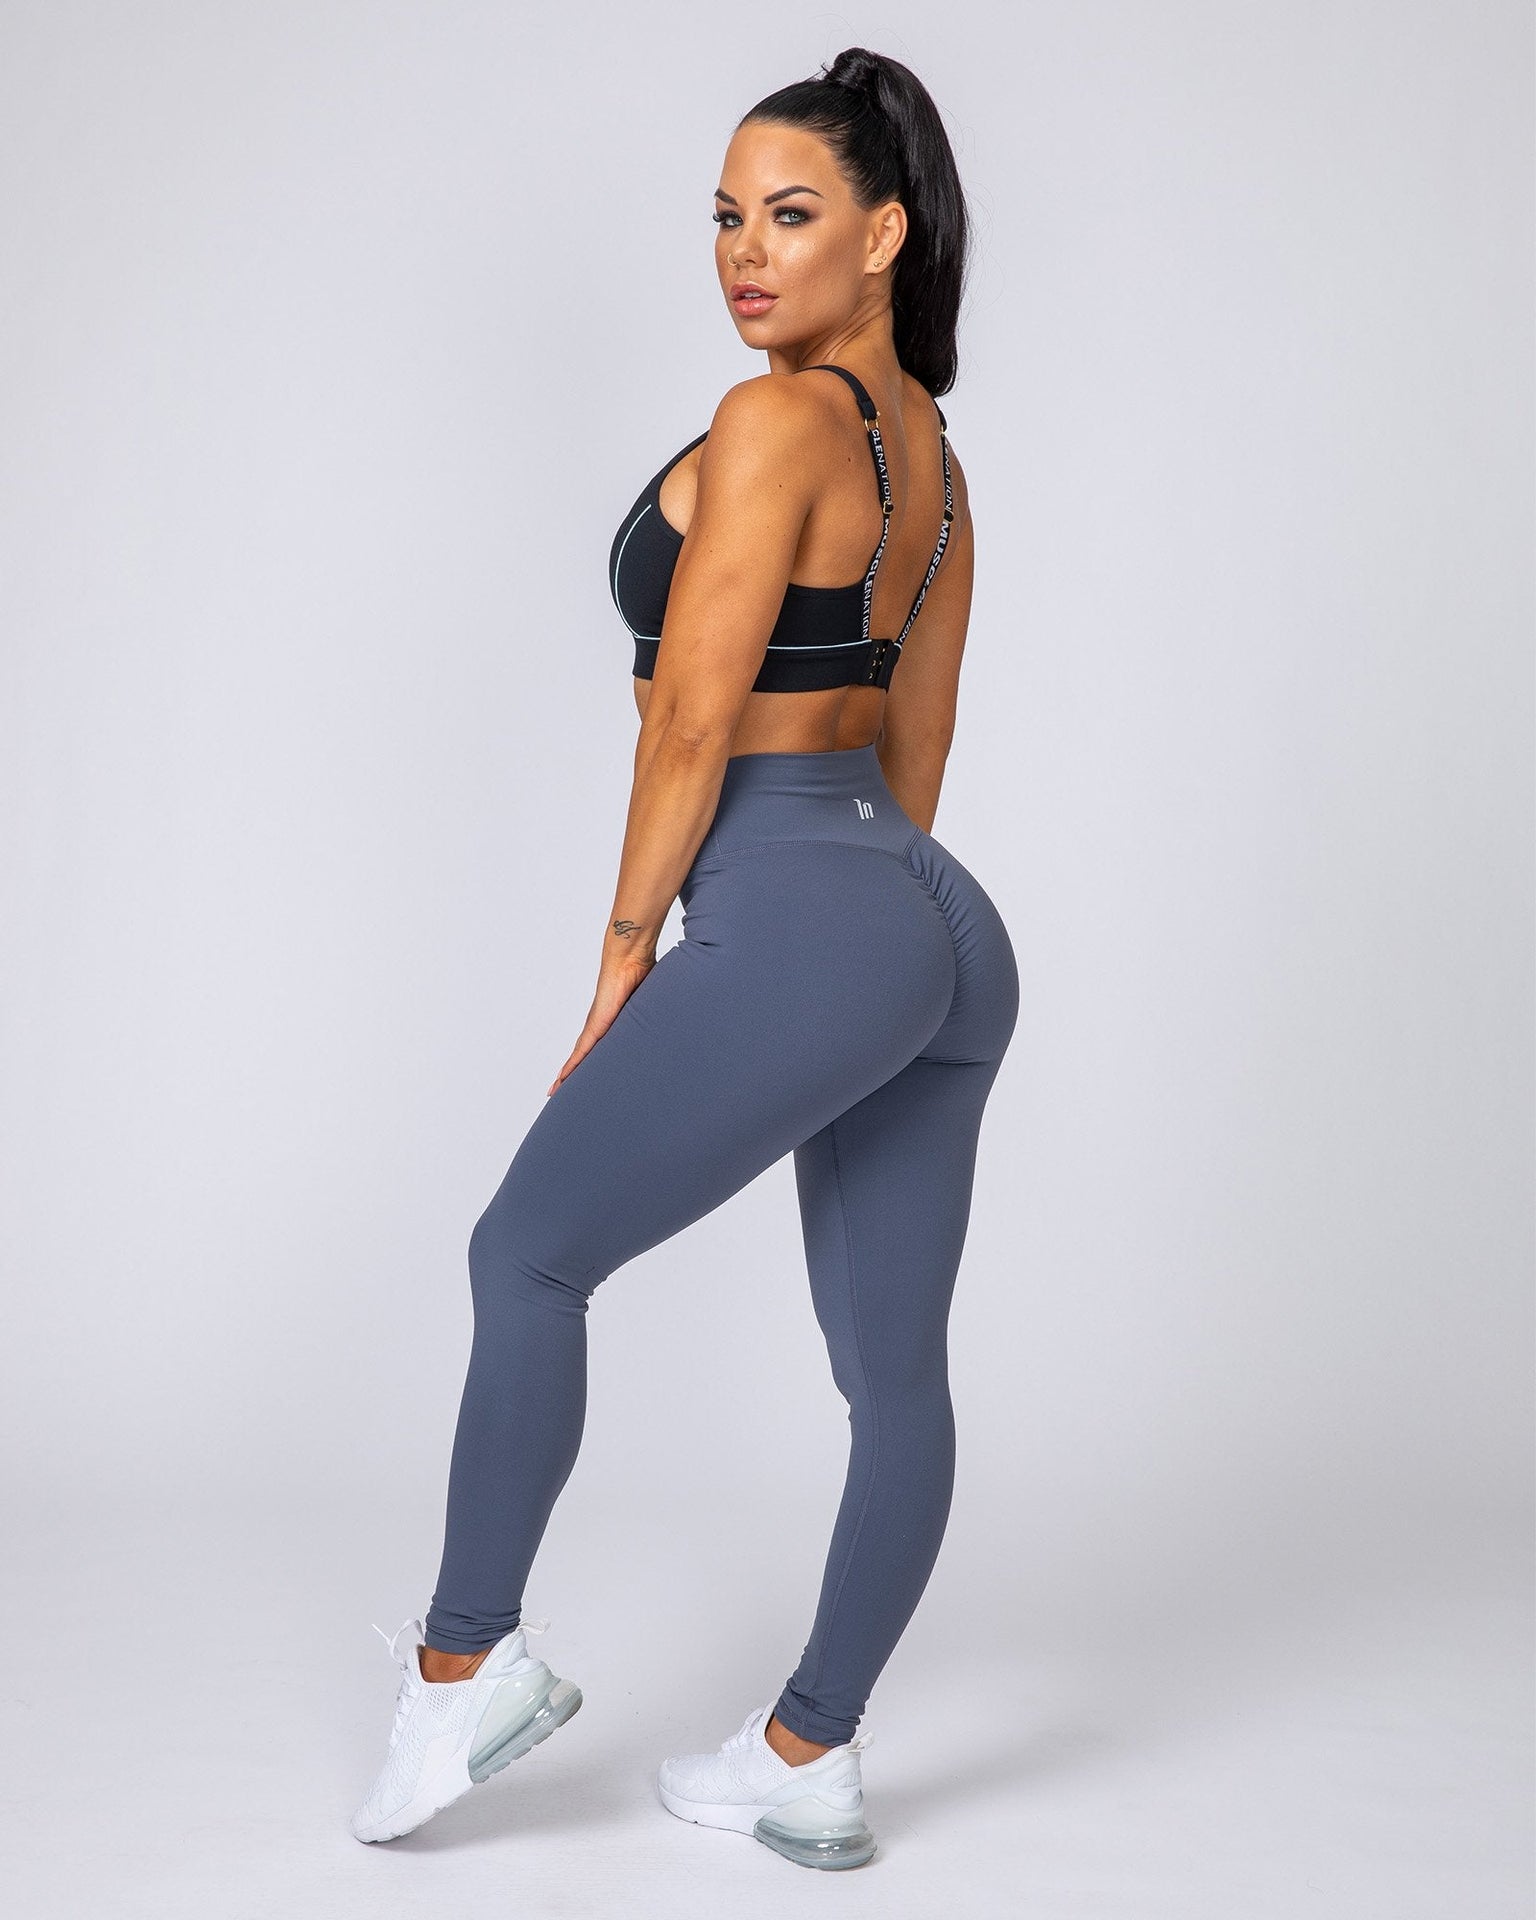 Seamless Full Length Leggings - Biscuit - Muscle Nation